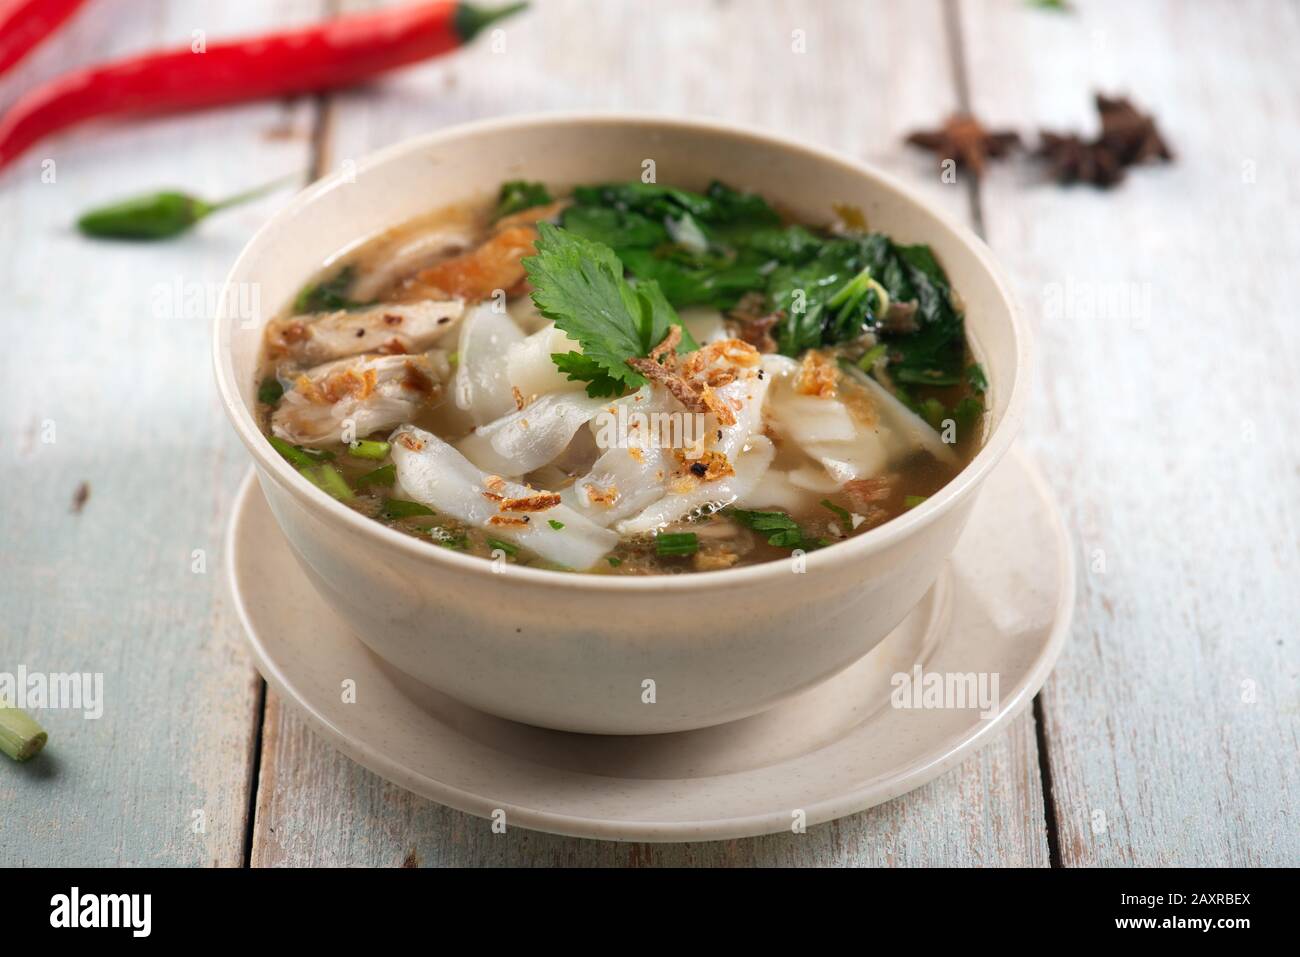 keow teow sup or ladna flat noodles soup in traditional malay style Stock Photo